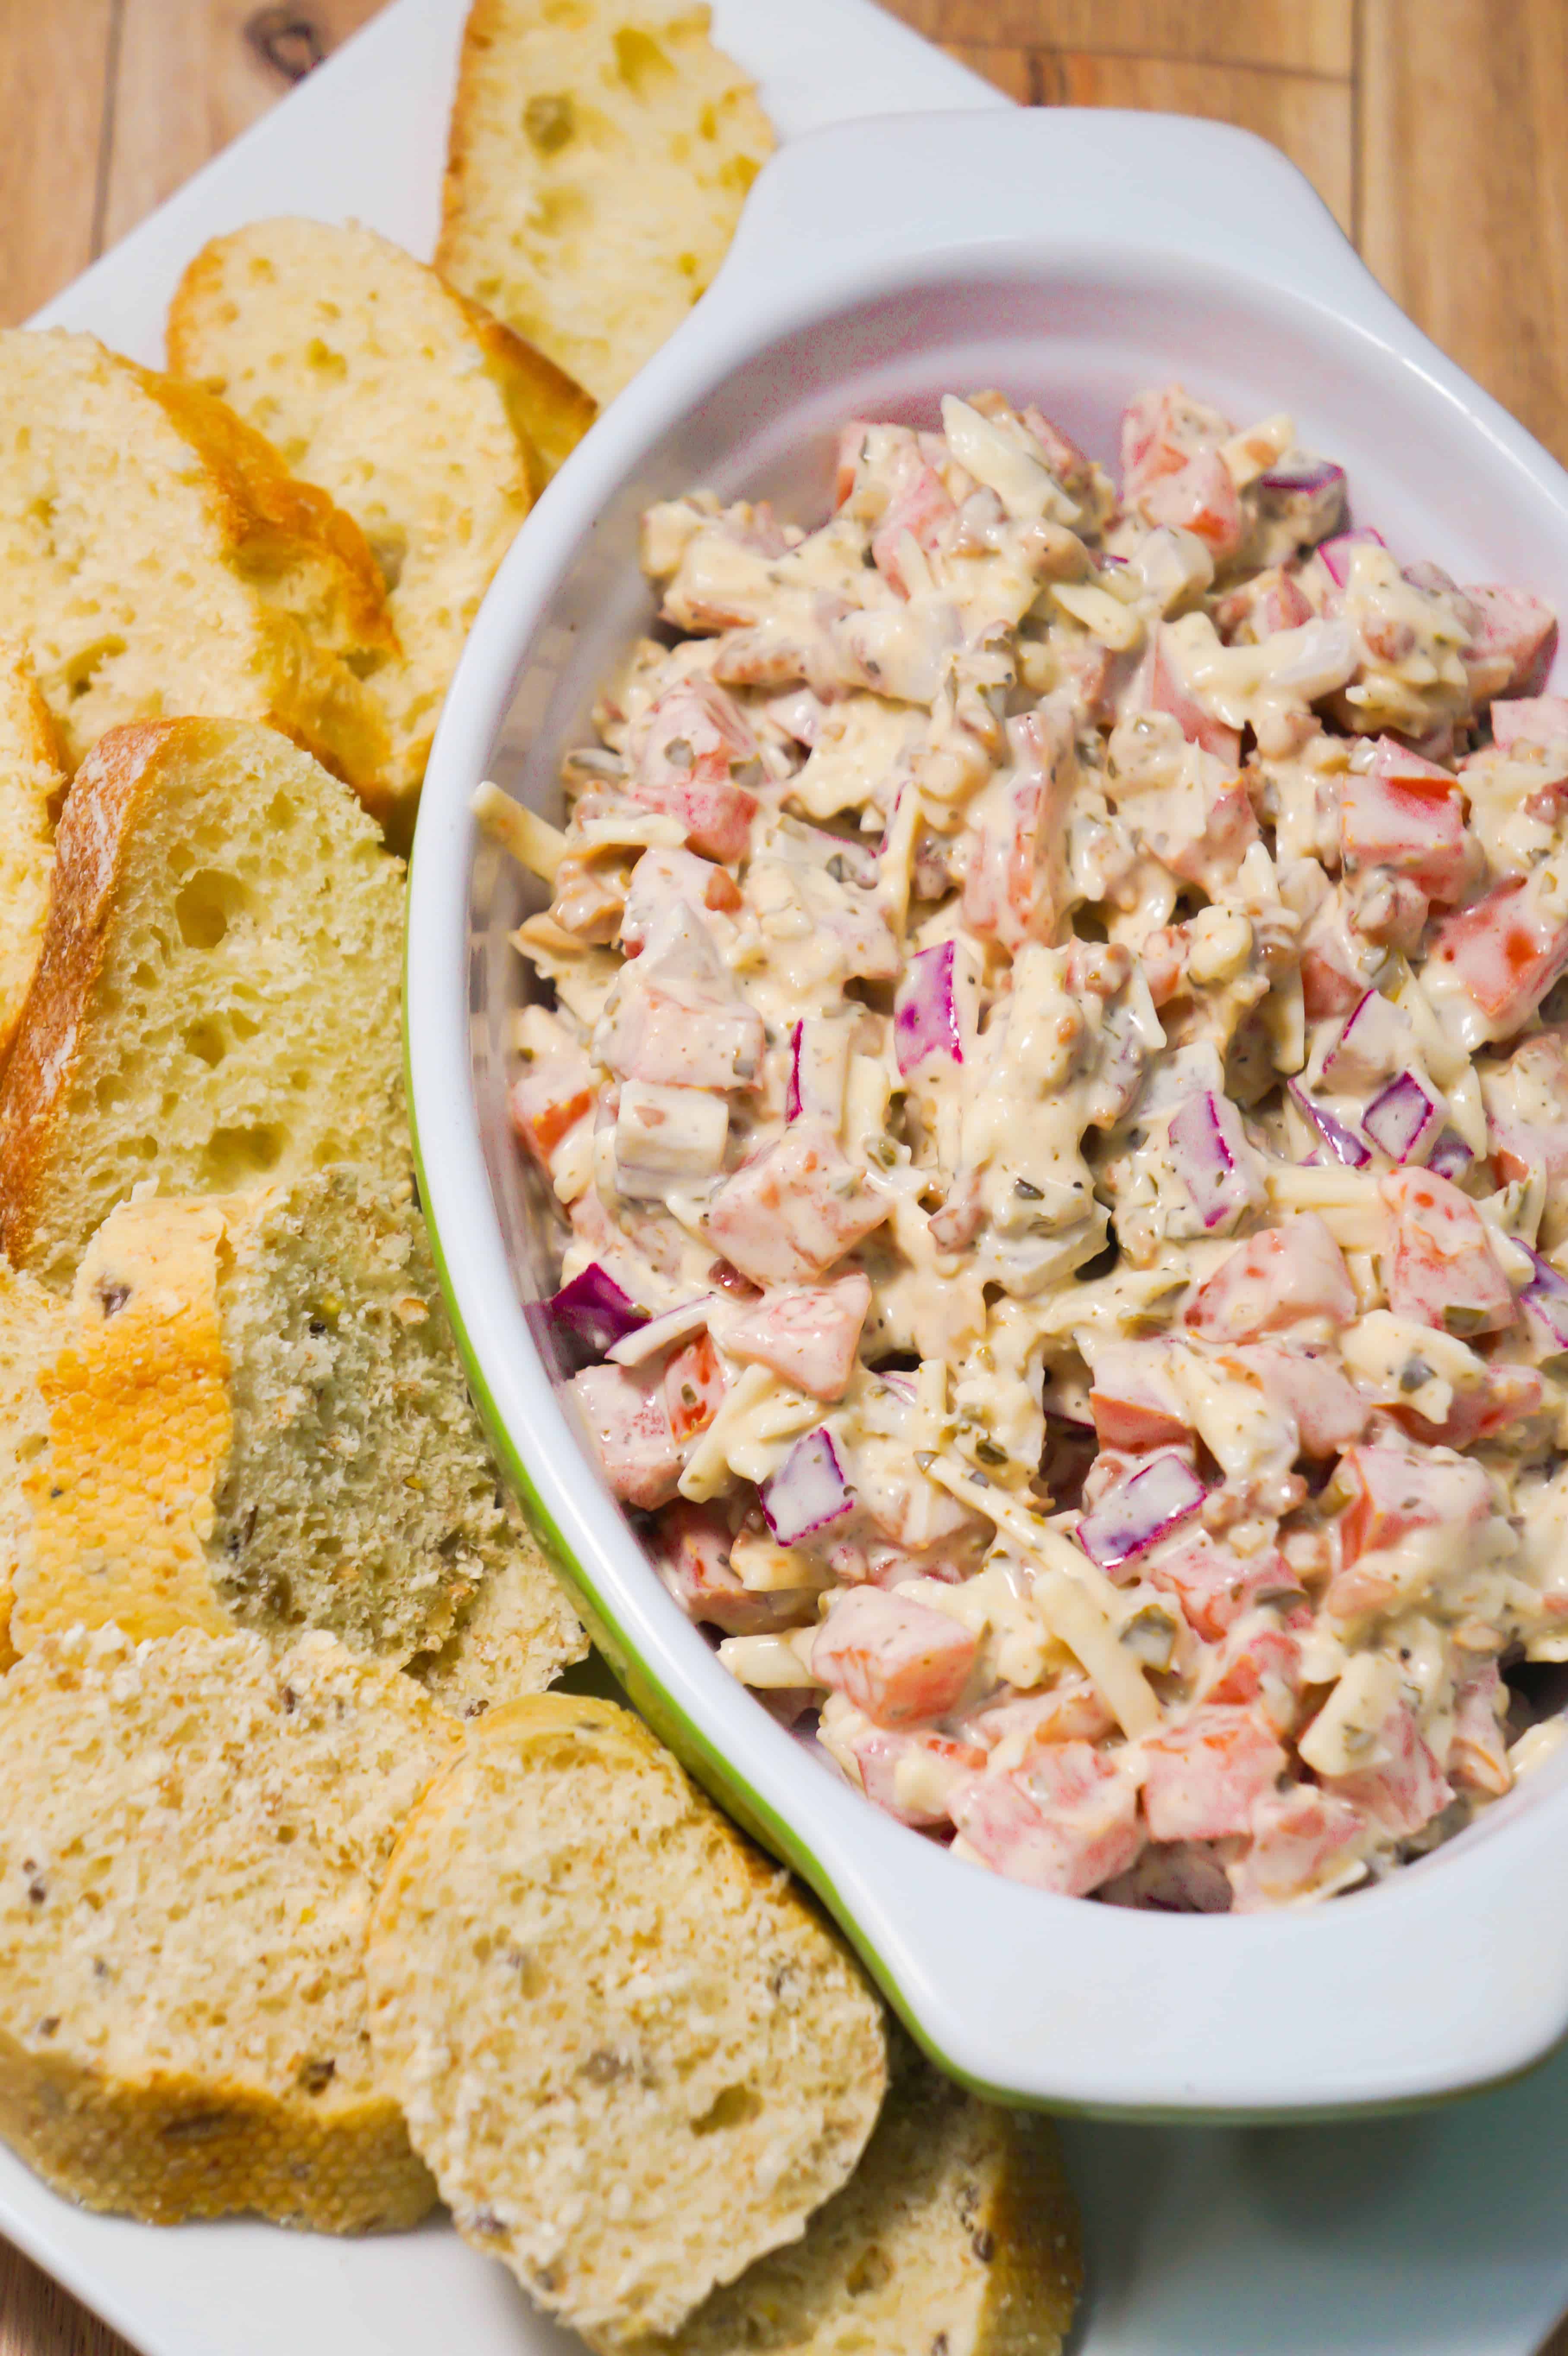 This cold bruschetta dip is the perfect party food.